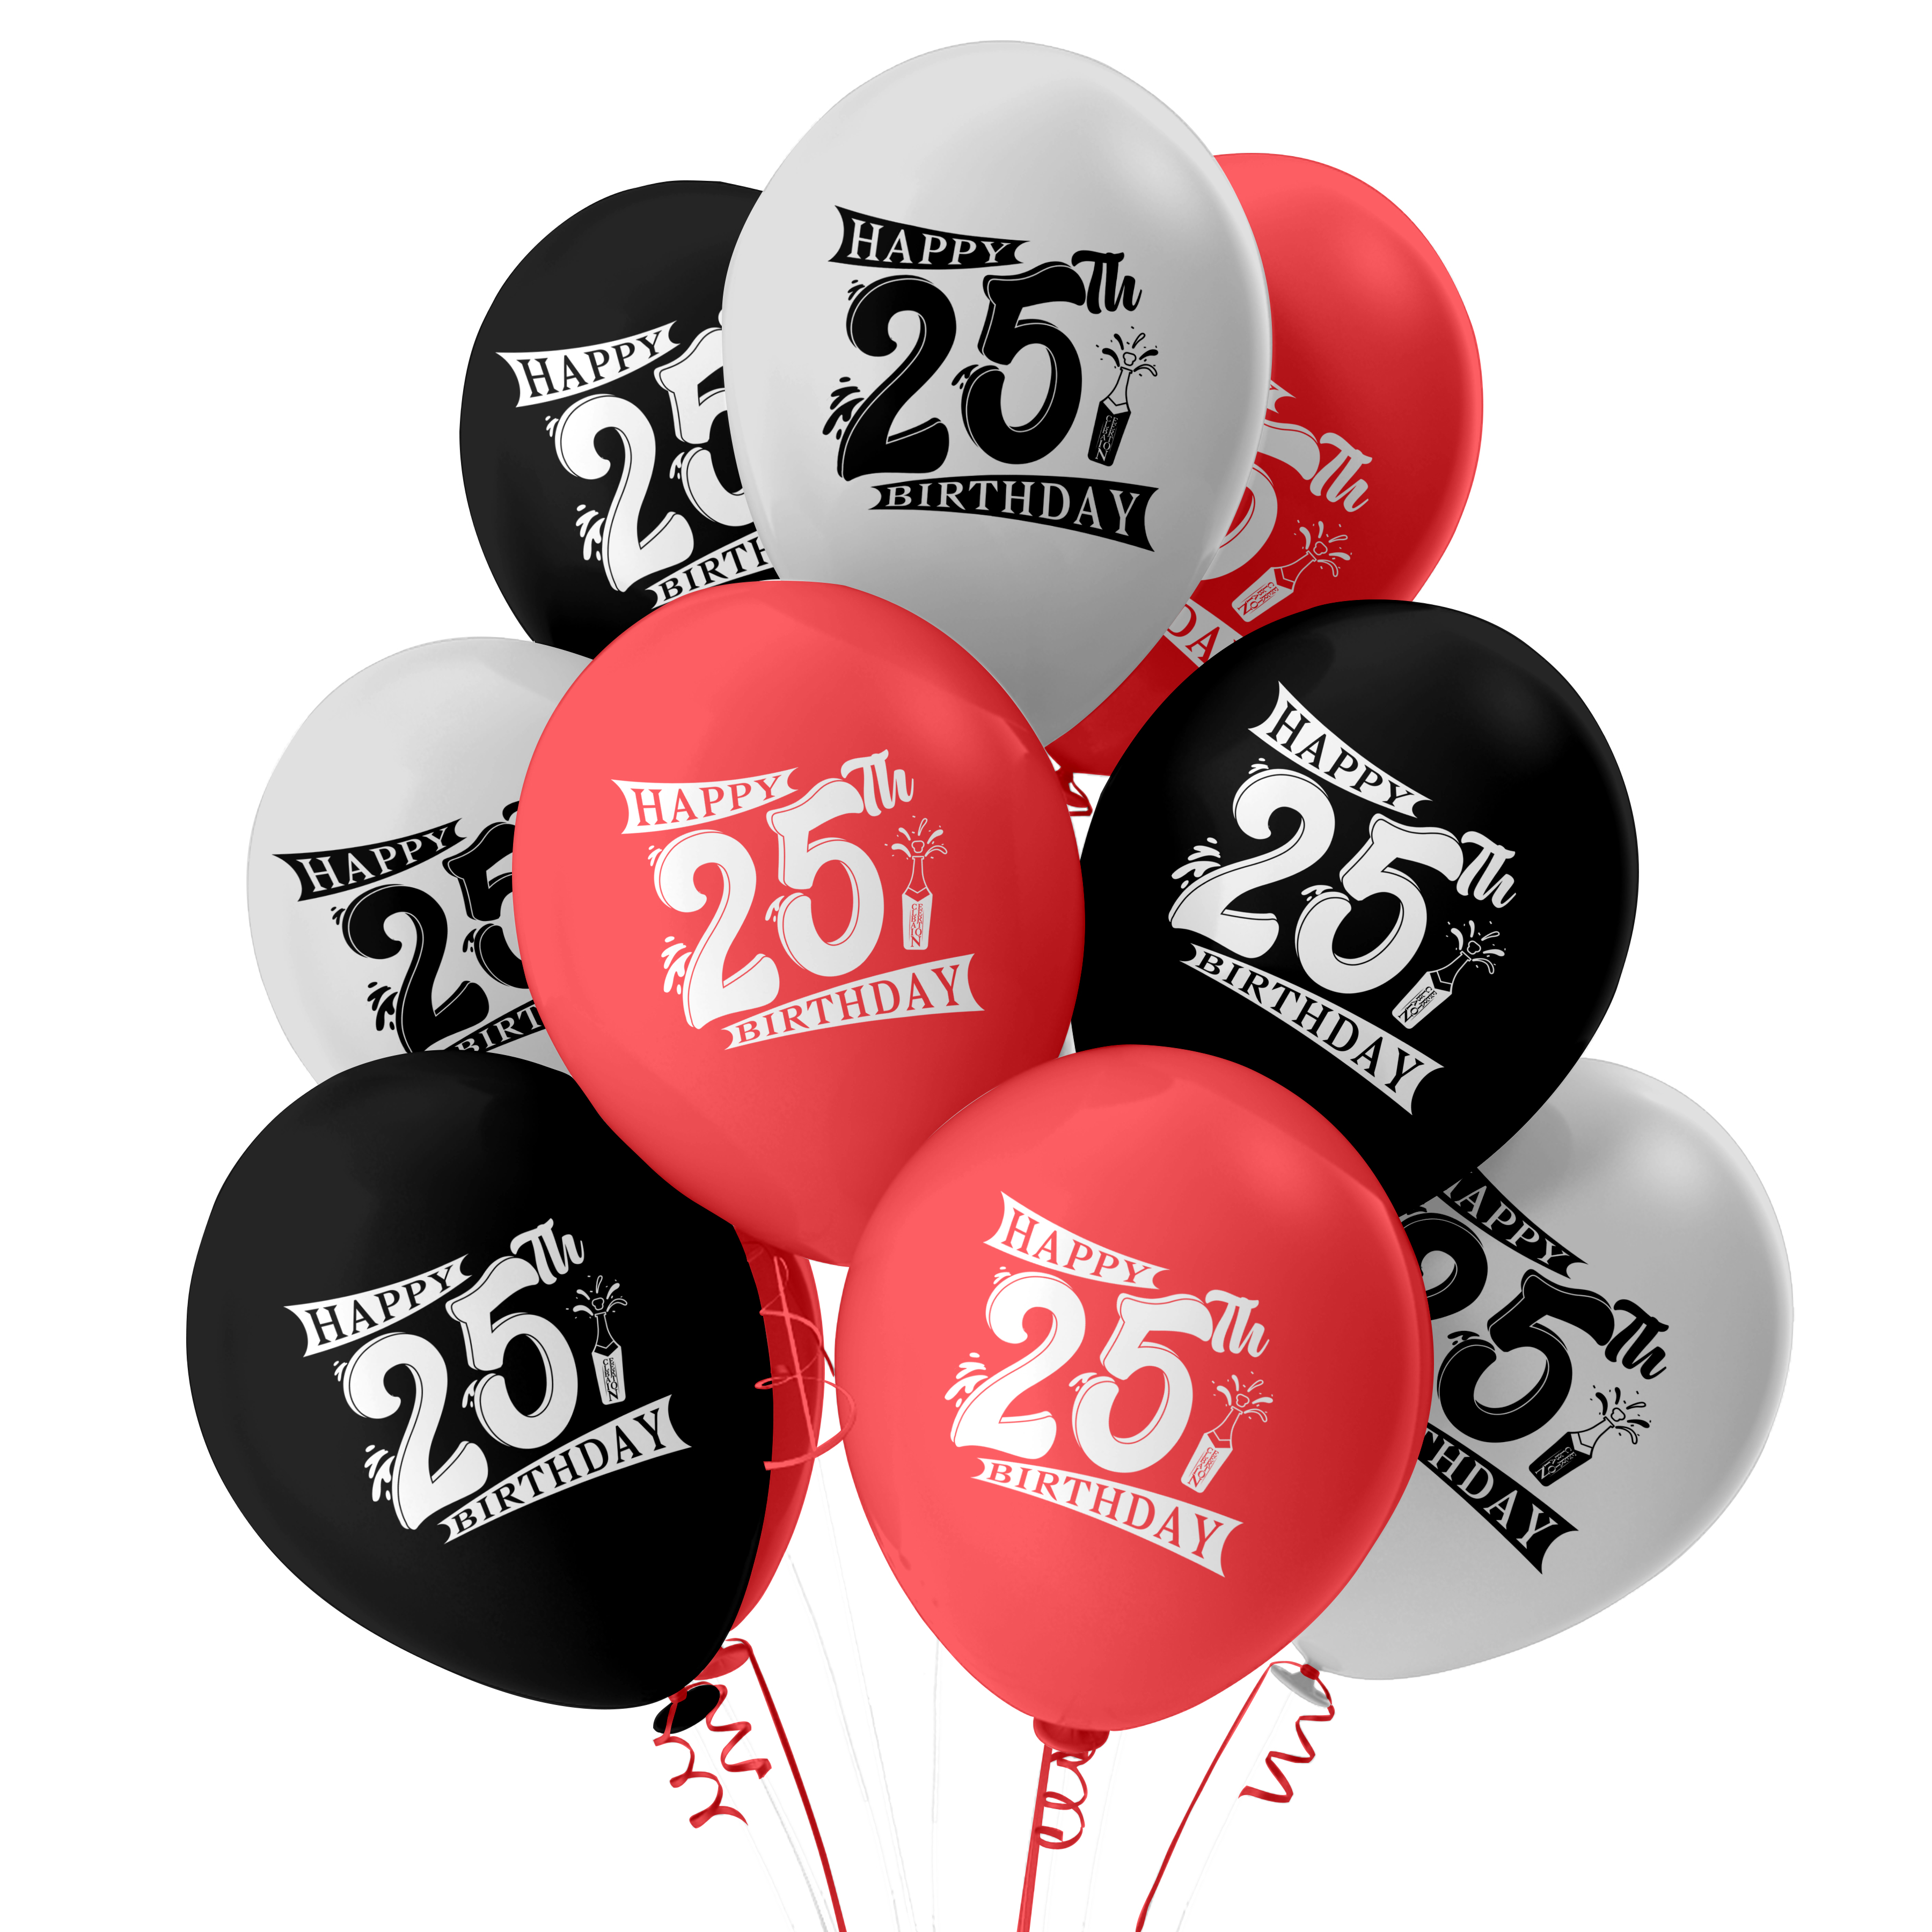 Make Your 25th Birthday Celebration Extra Special With Our Combo Kit Of 30pcs Printed Balloons And A Banner Pack Of 31pcs